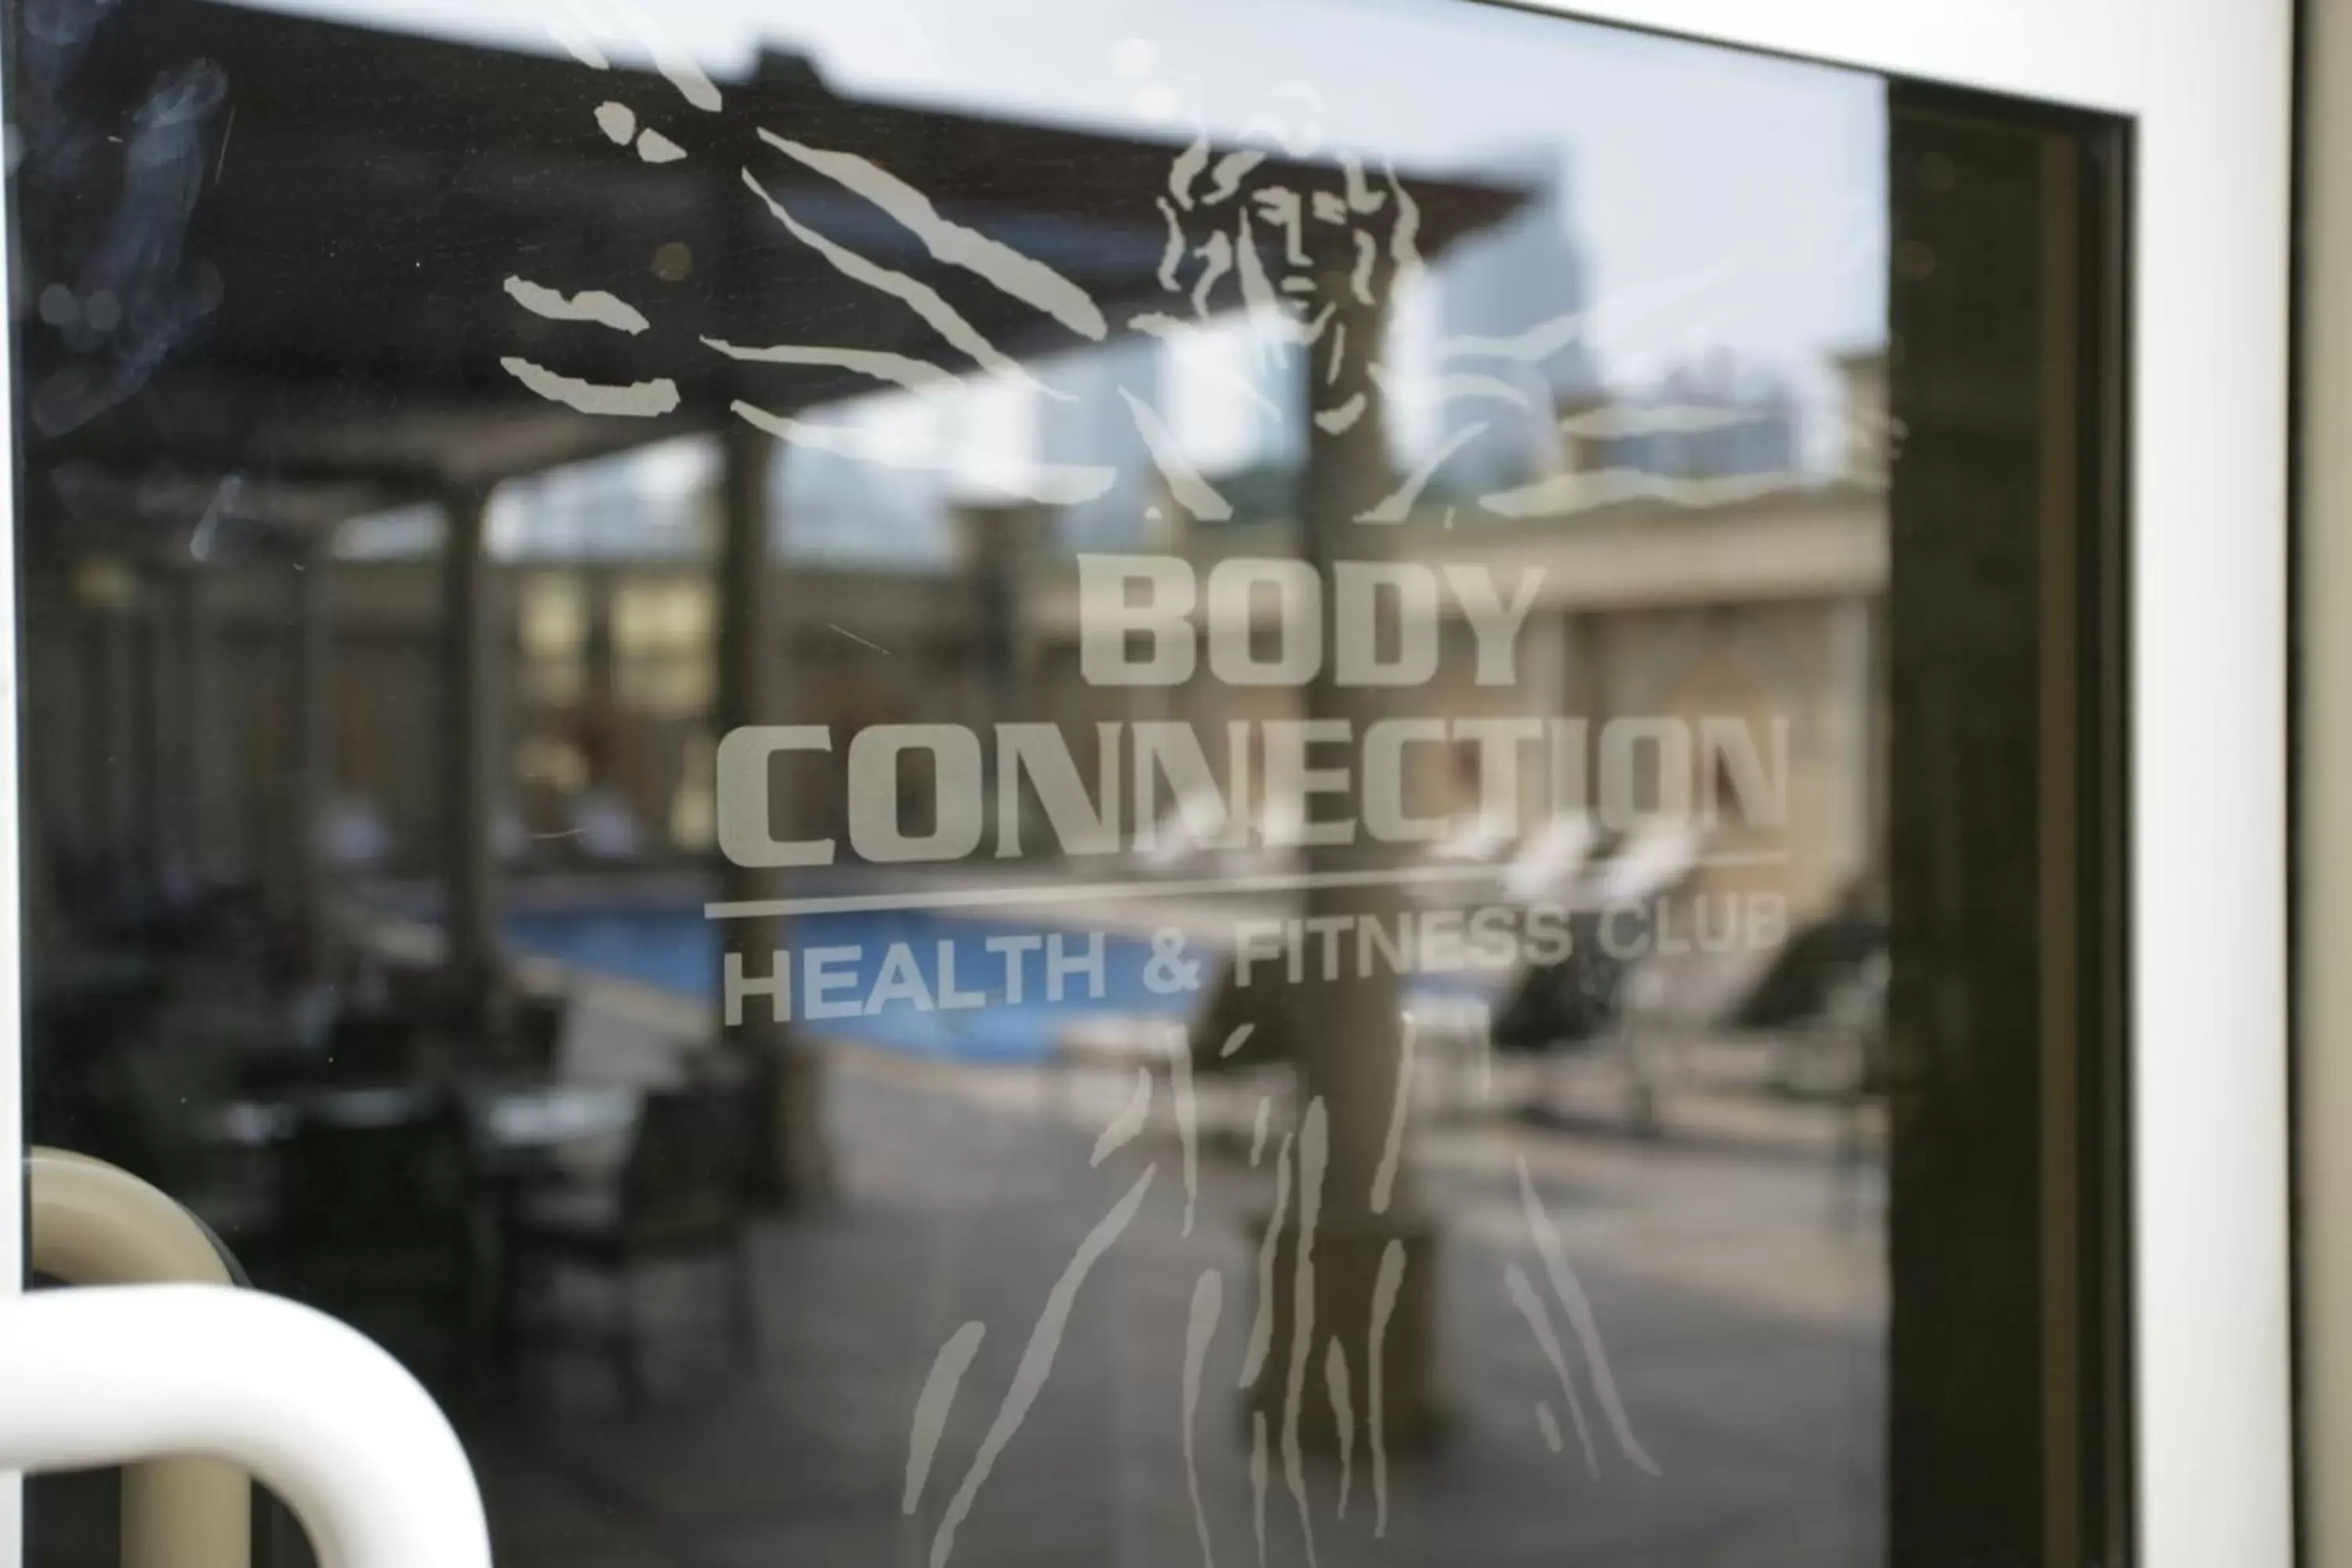 Fitness centre/facilities, Property Logo/Sign in Chelsea Plaza Hotel